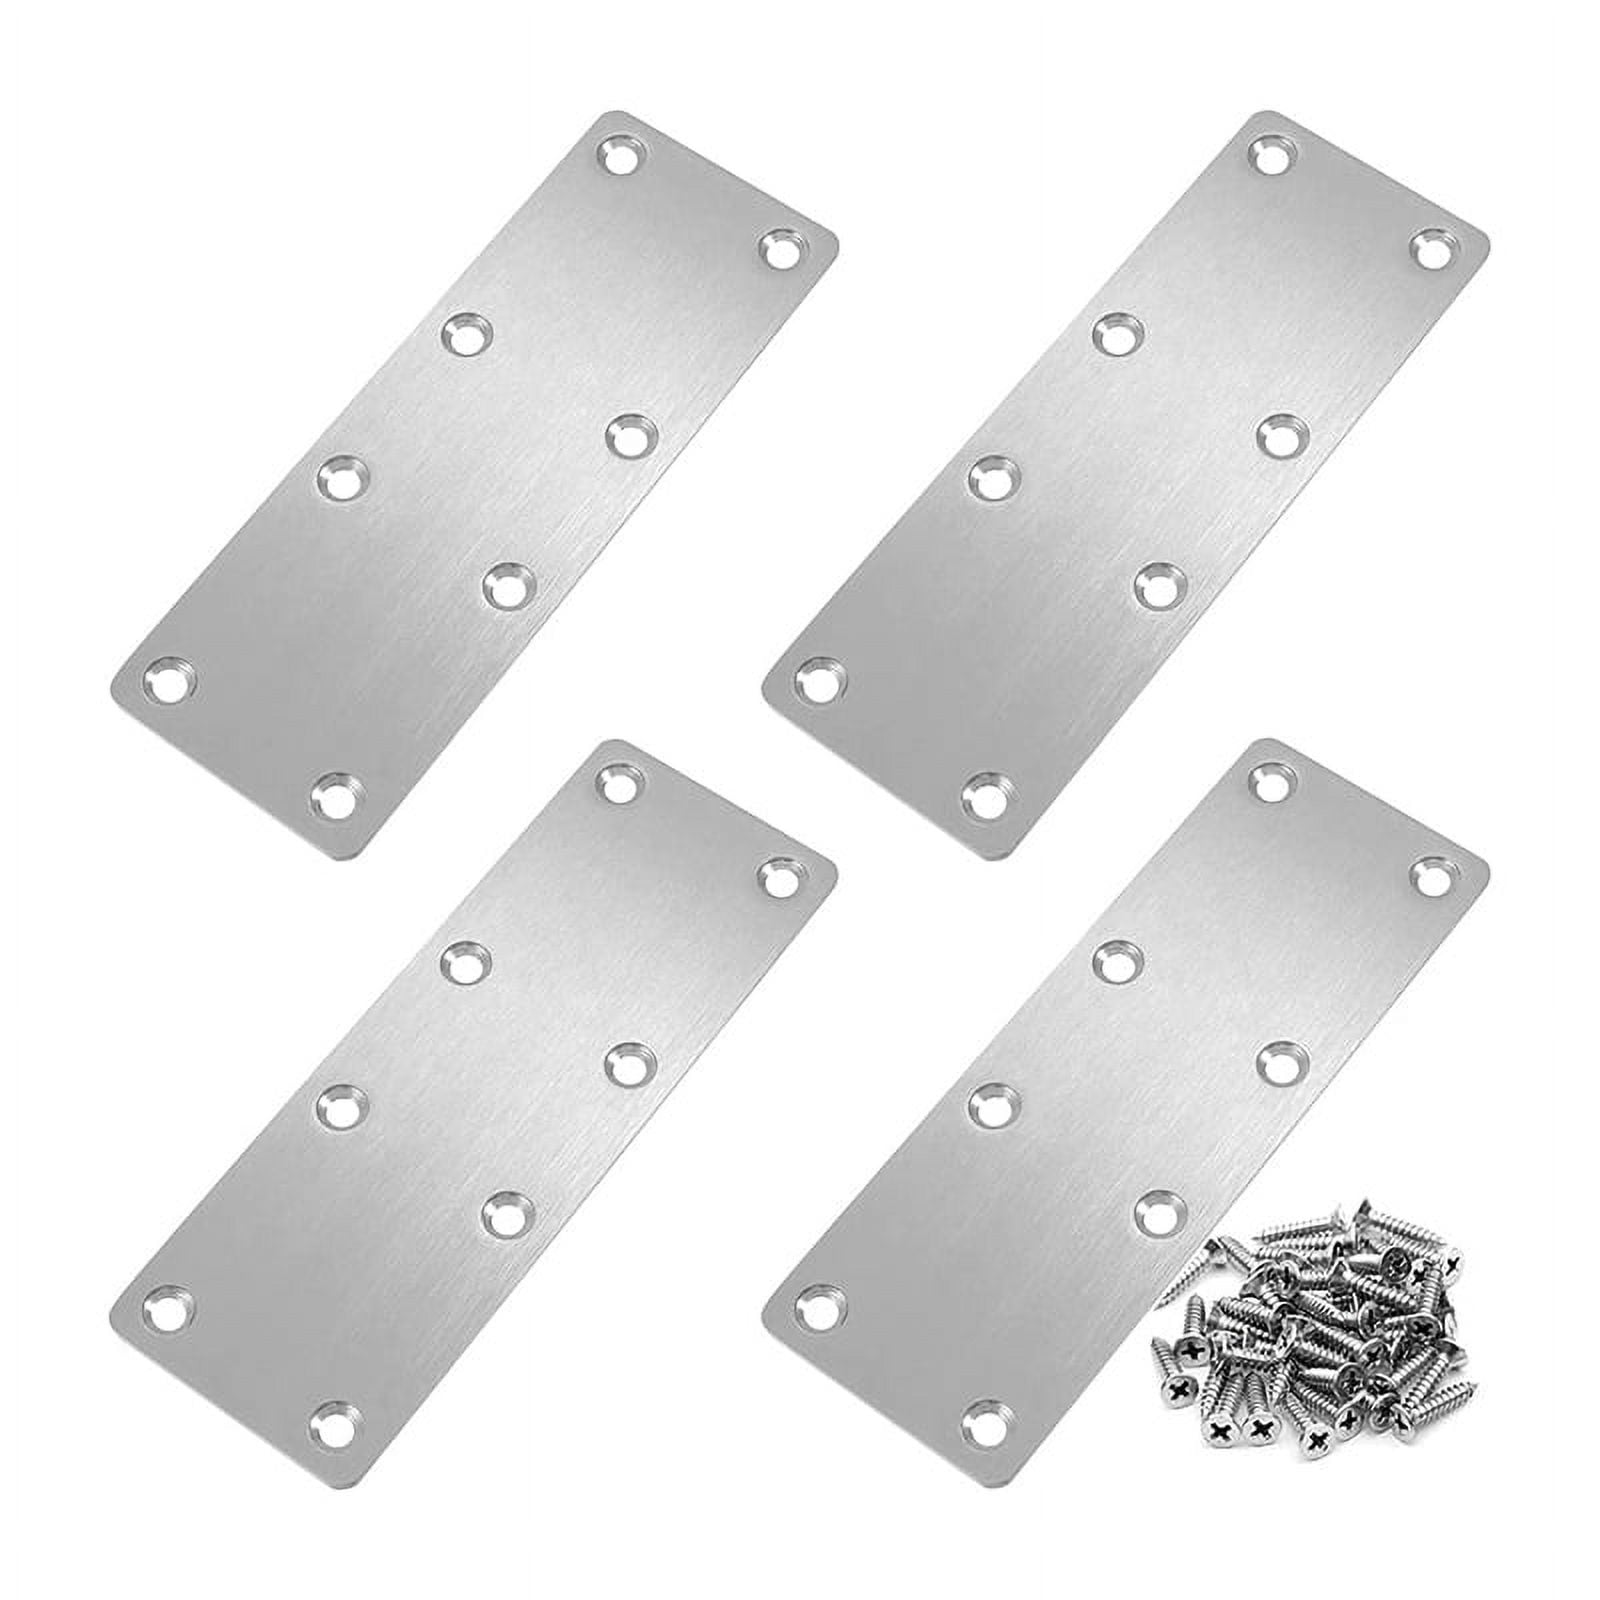 4 PCS Straight Bracket Flat Mending Plate Stainless Steel Brace with ...